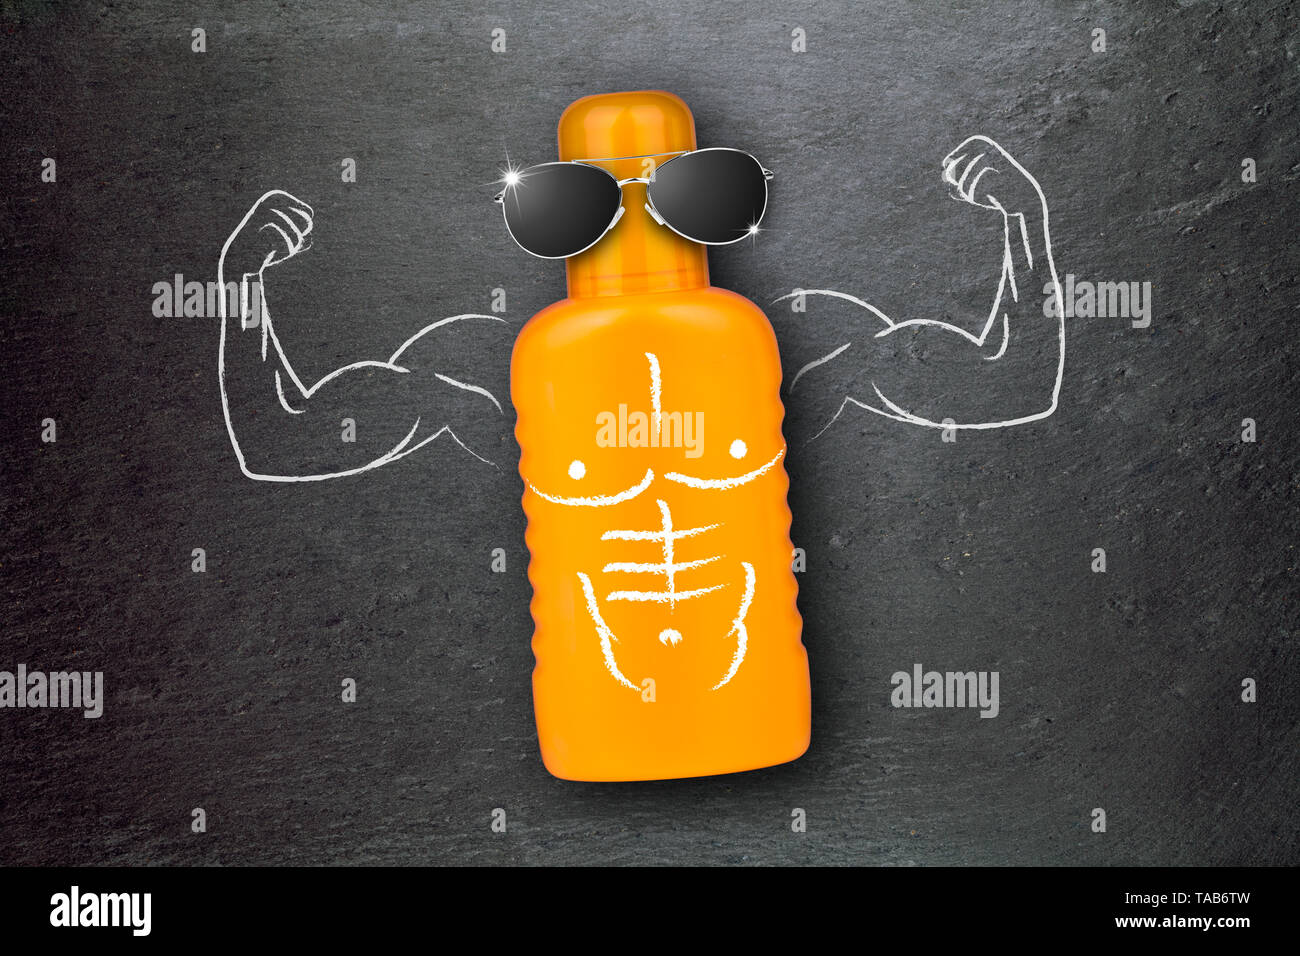 sun lotion with muscle arms and sunglasses illustration Stock Photo